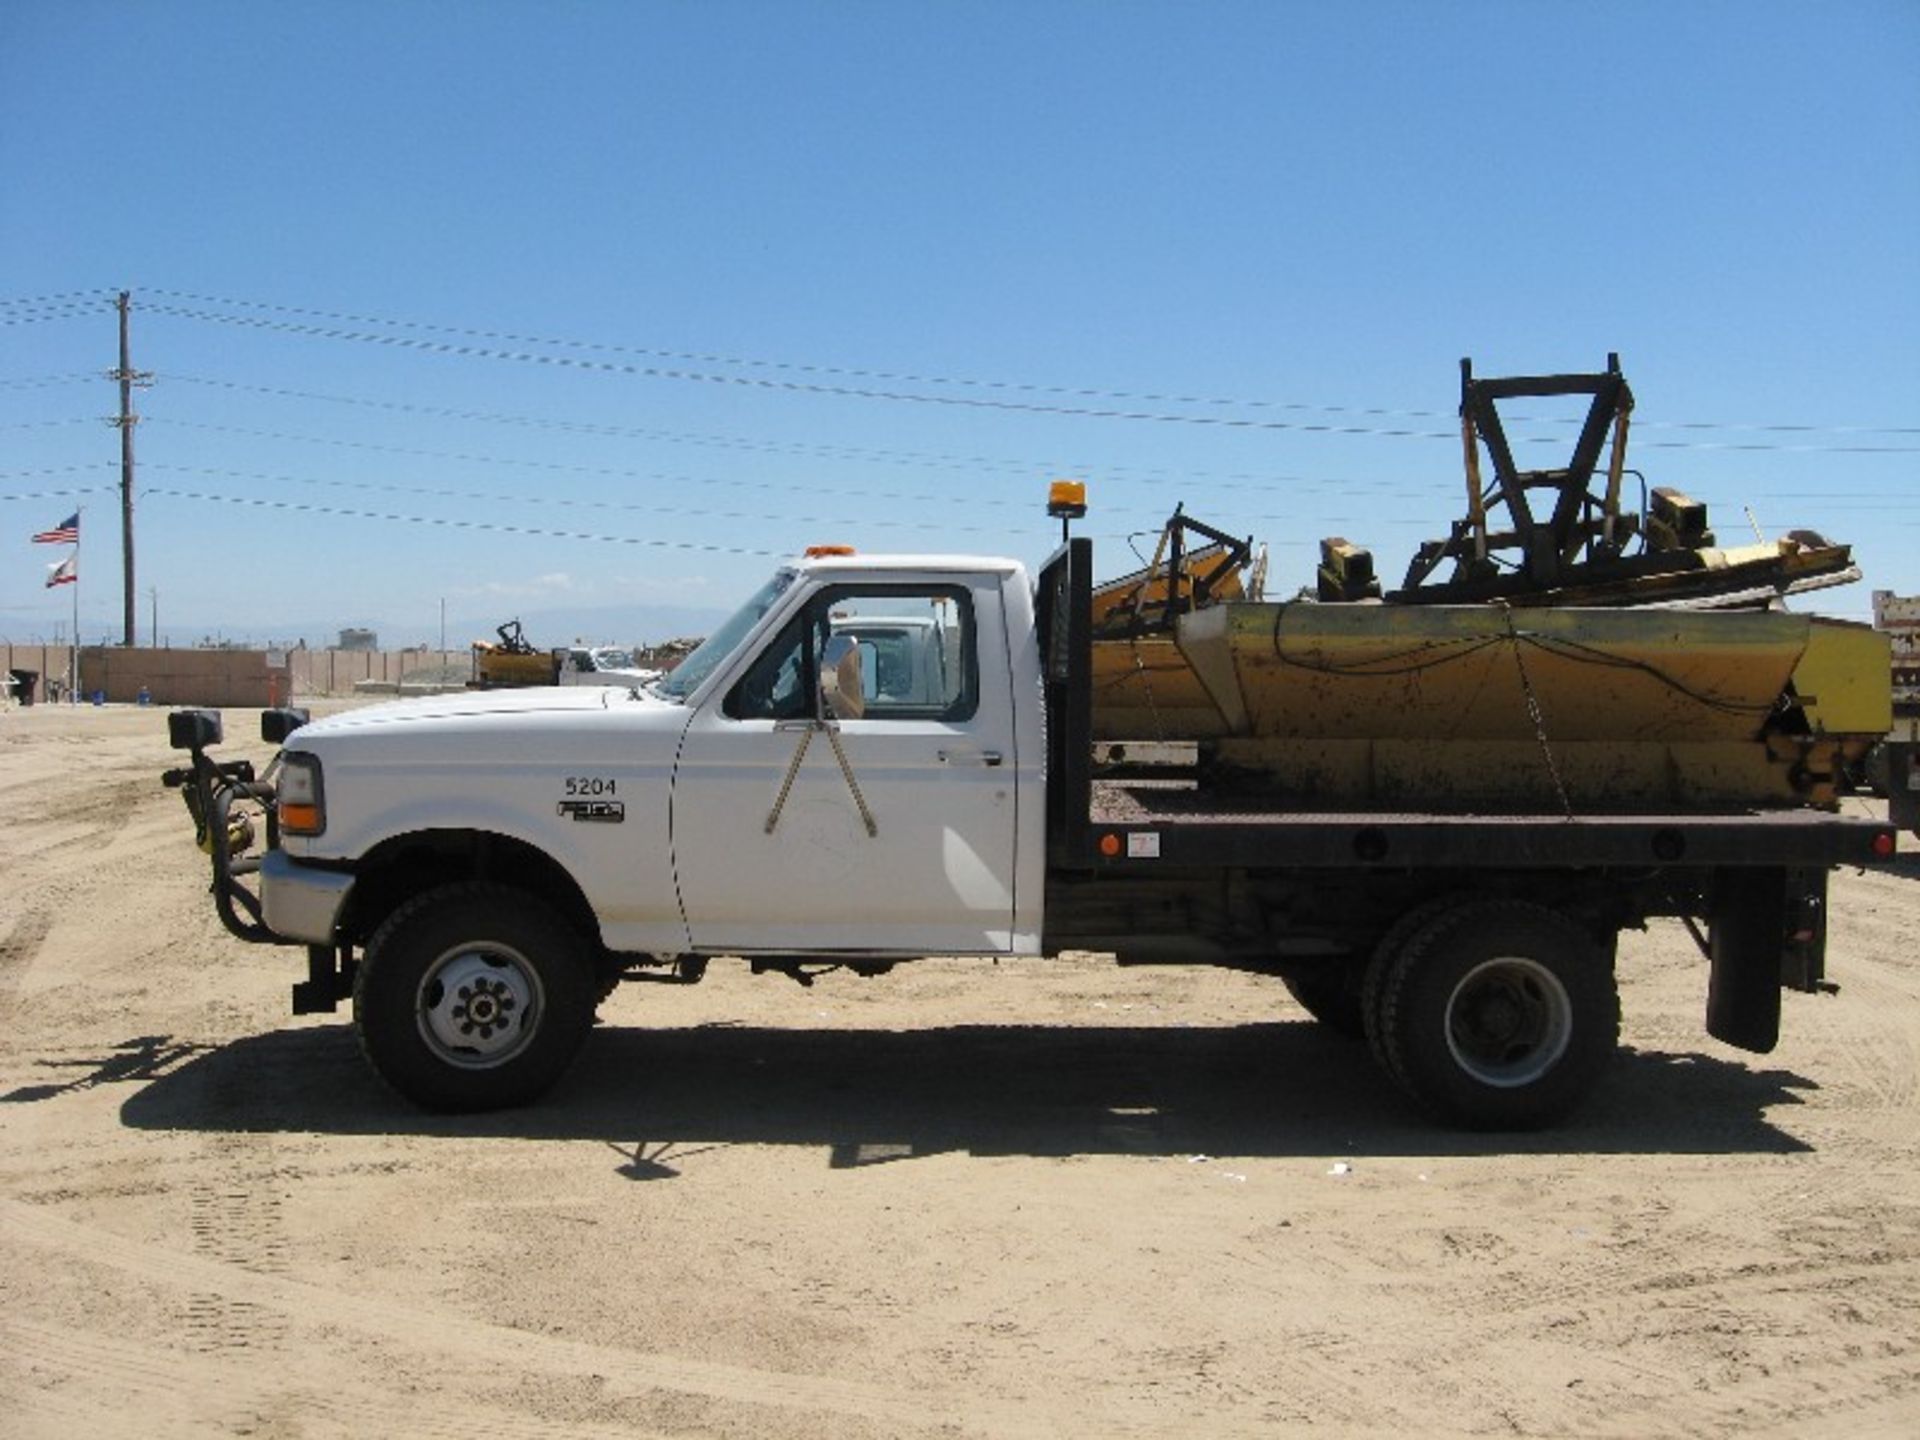 1996 Ford F350 - Image 2 of 3